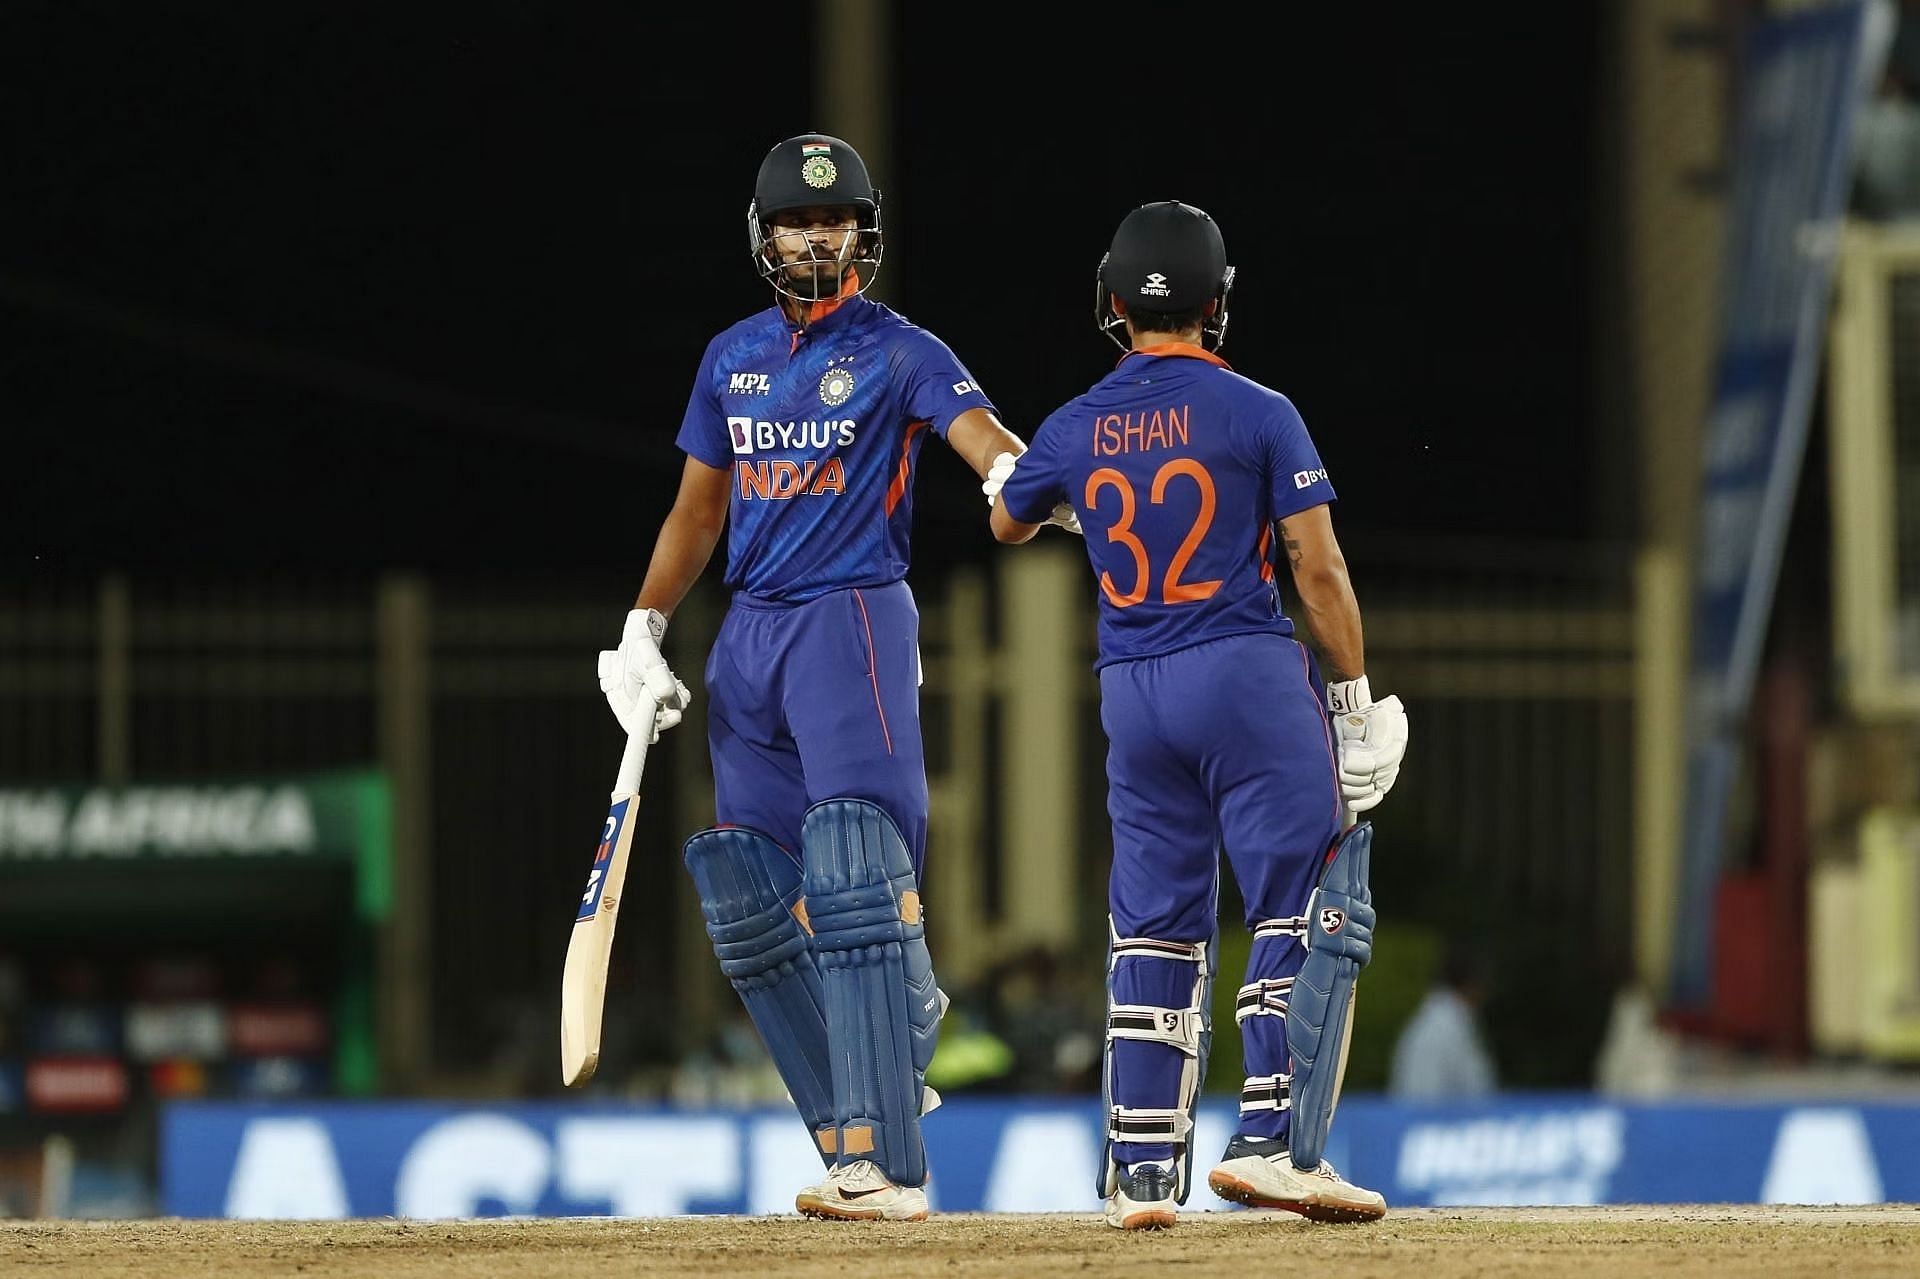 Shreyas Iyer and Ishan Kishan might compete for a middle-order berth. [P/C: Getty]